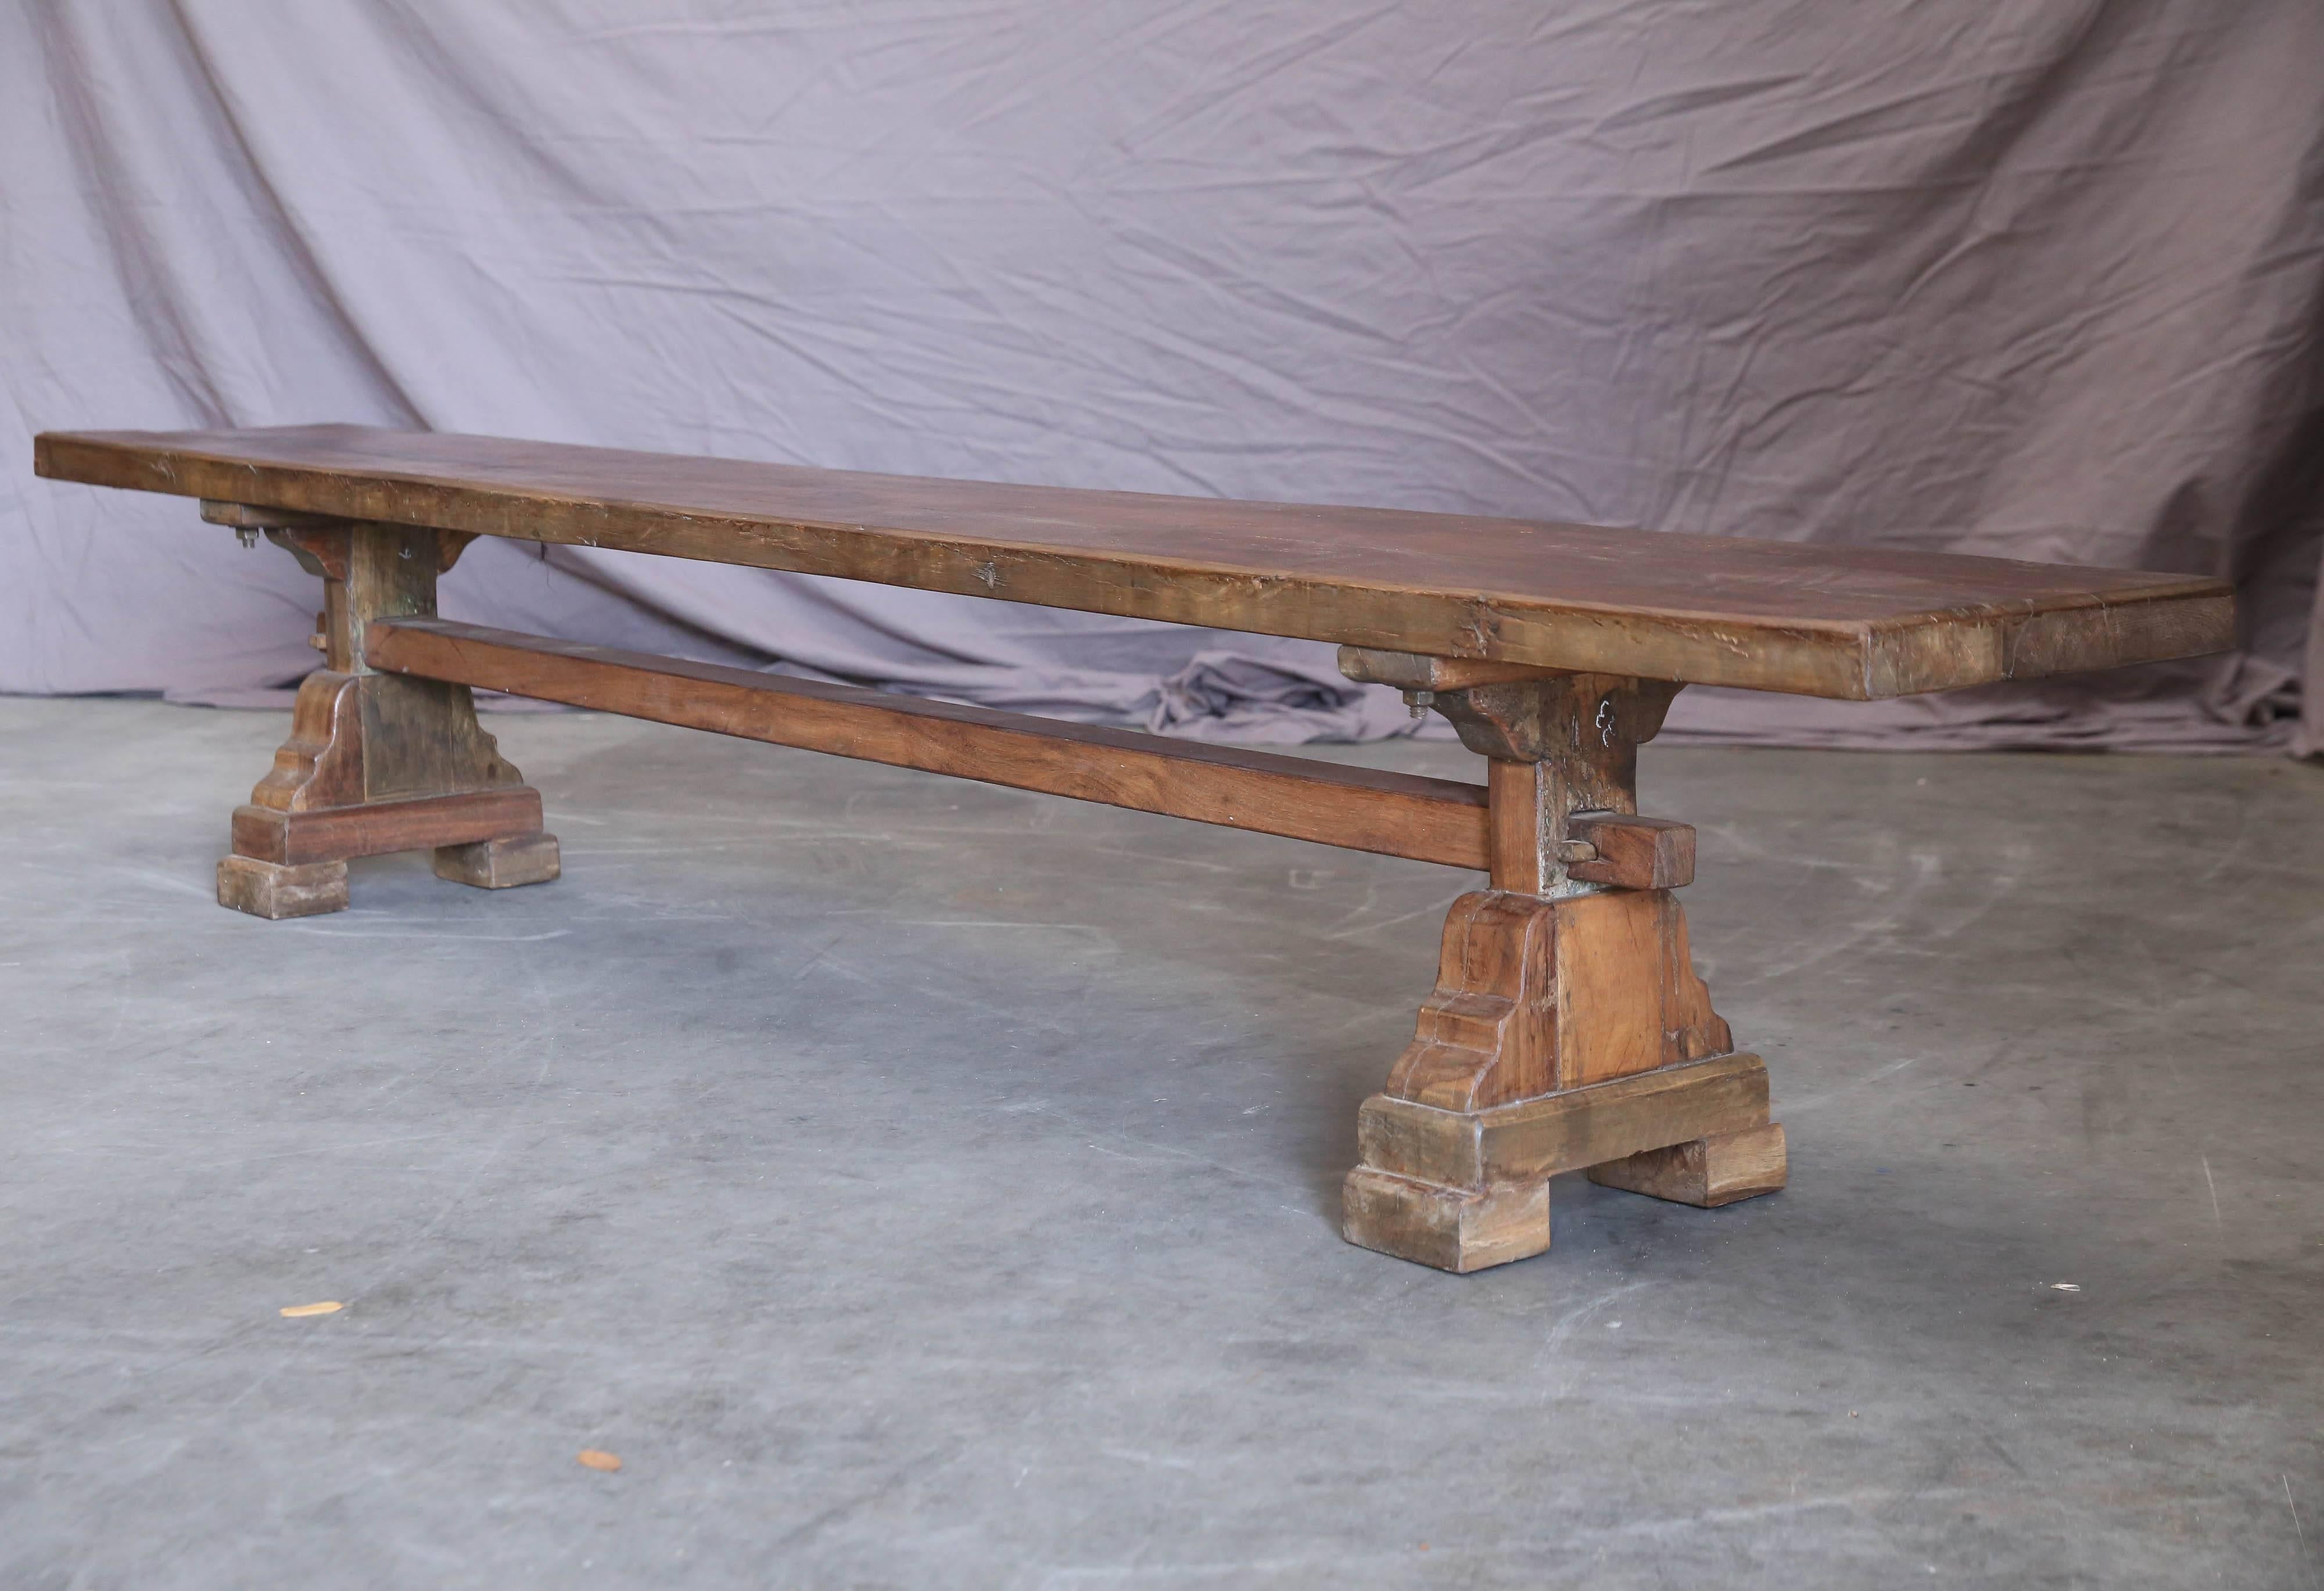 It is a flat bench with a solid thick top supported on two pedestals on either end. It is heavily built in the old world carpentry with immaculate dovetail joints. Benches like this one will last several generations. It stood the test of